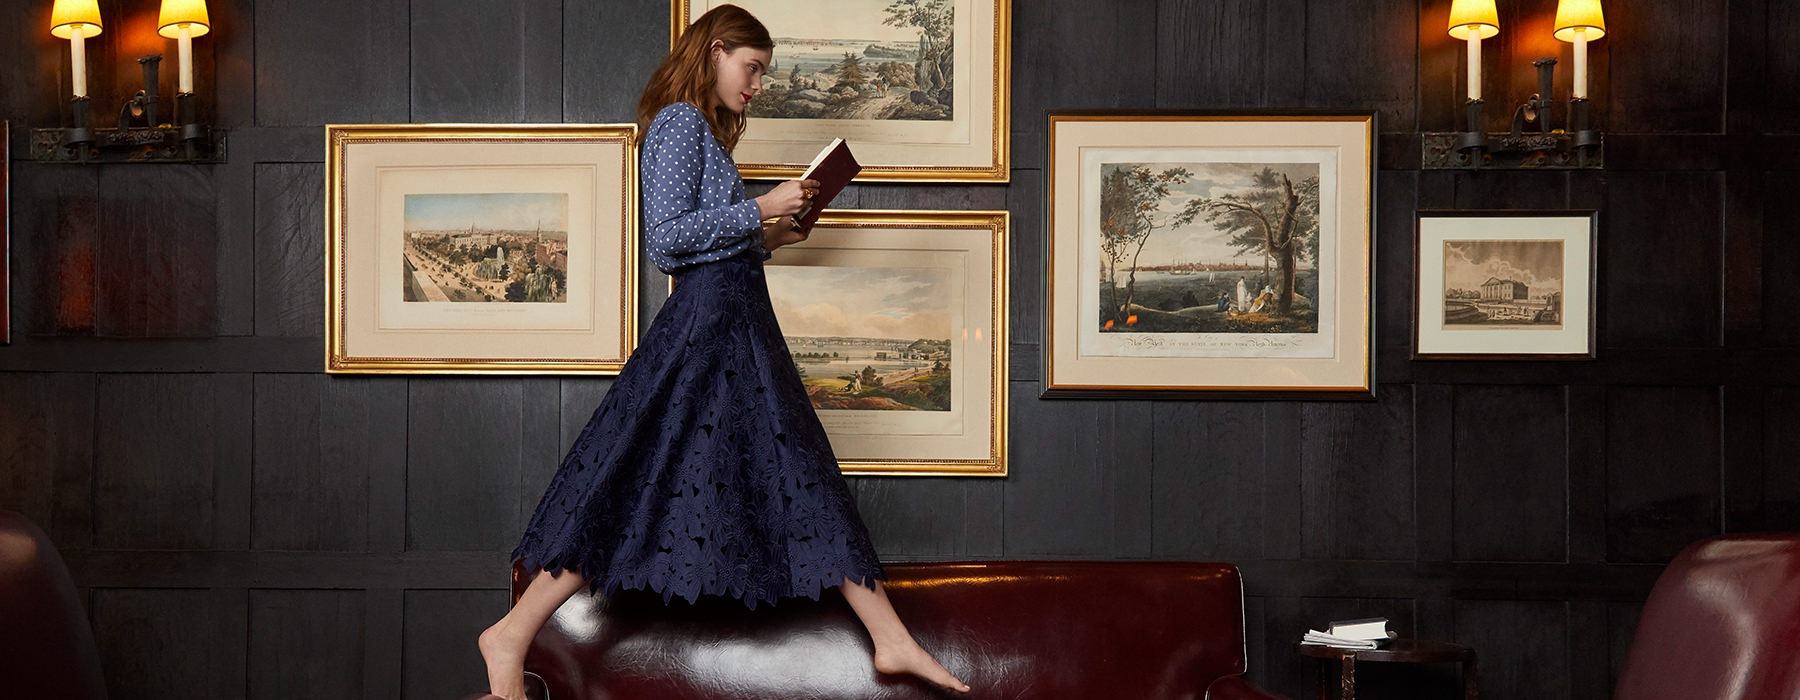 Woman walking on a couch reading a book 